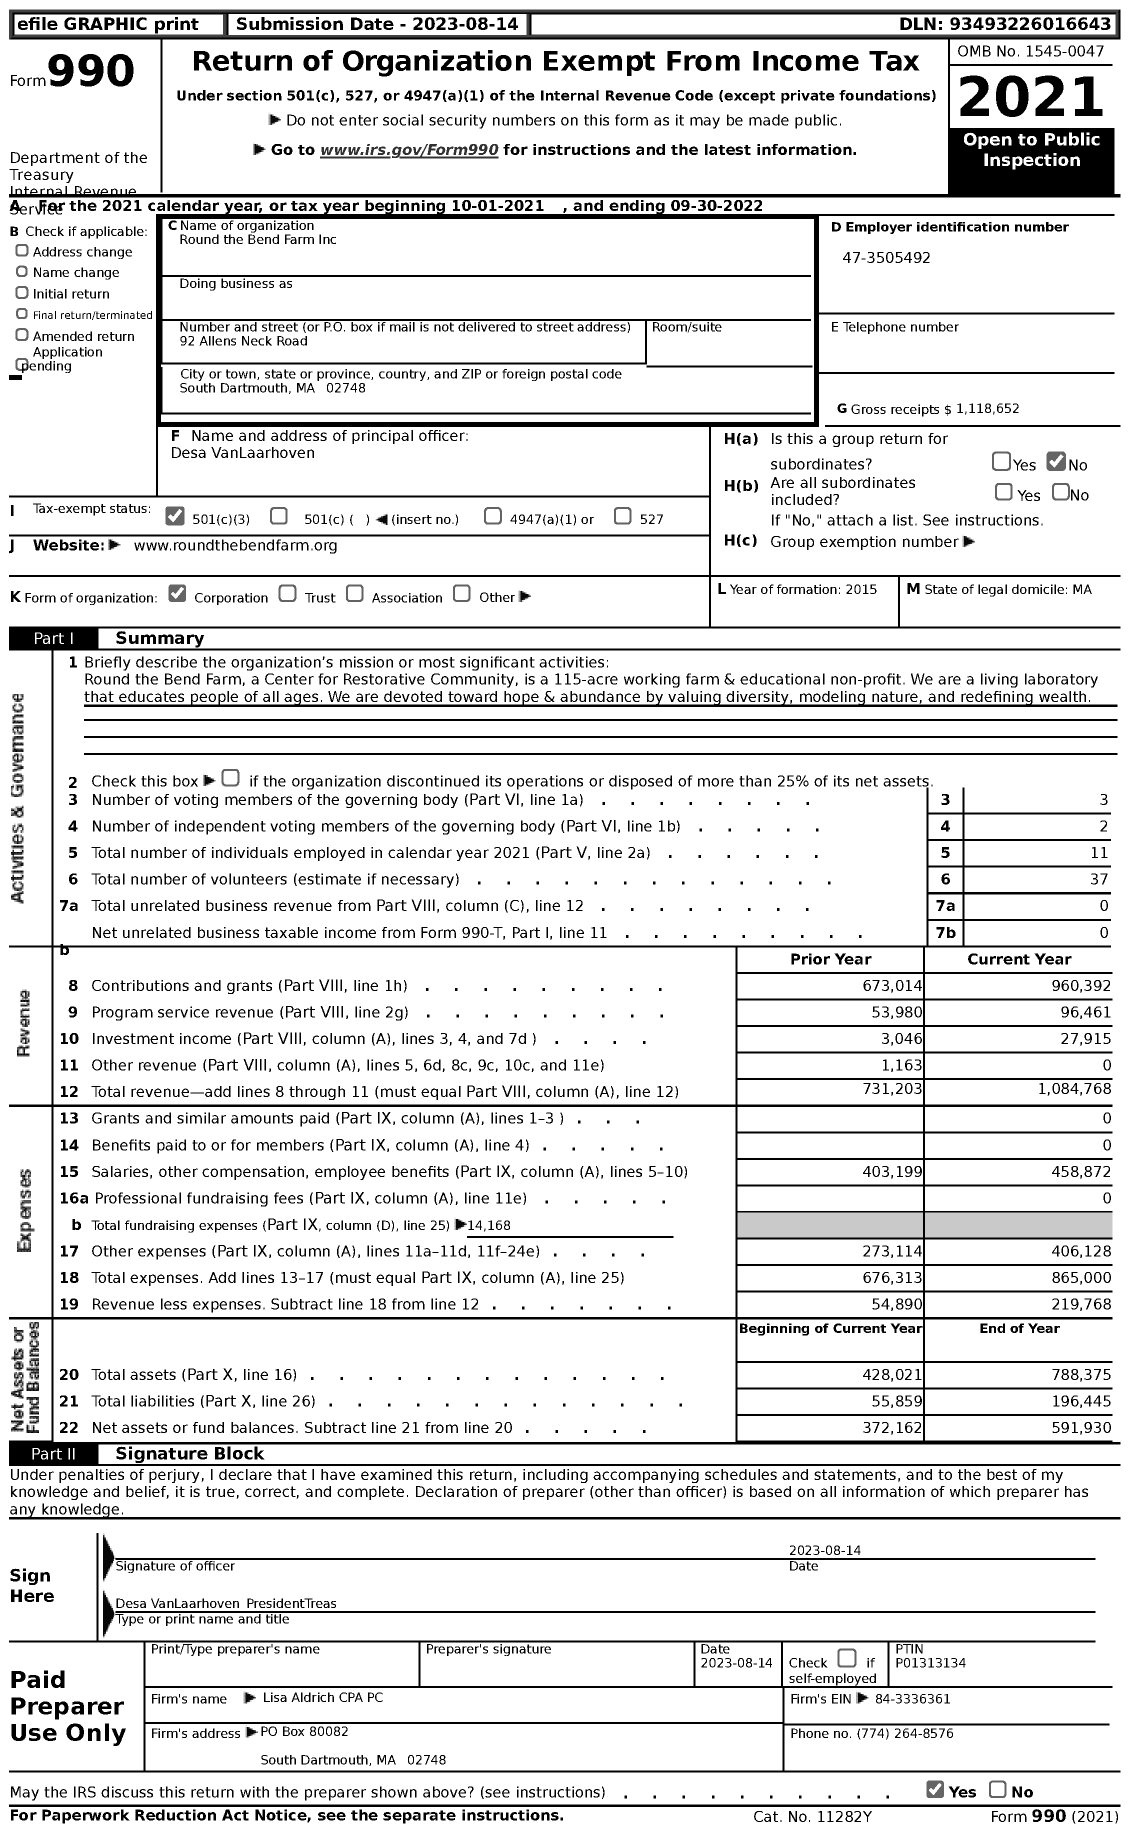 Image of first page of 2021 Form 990 for Round the Bend Farm